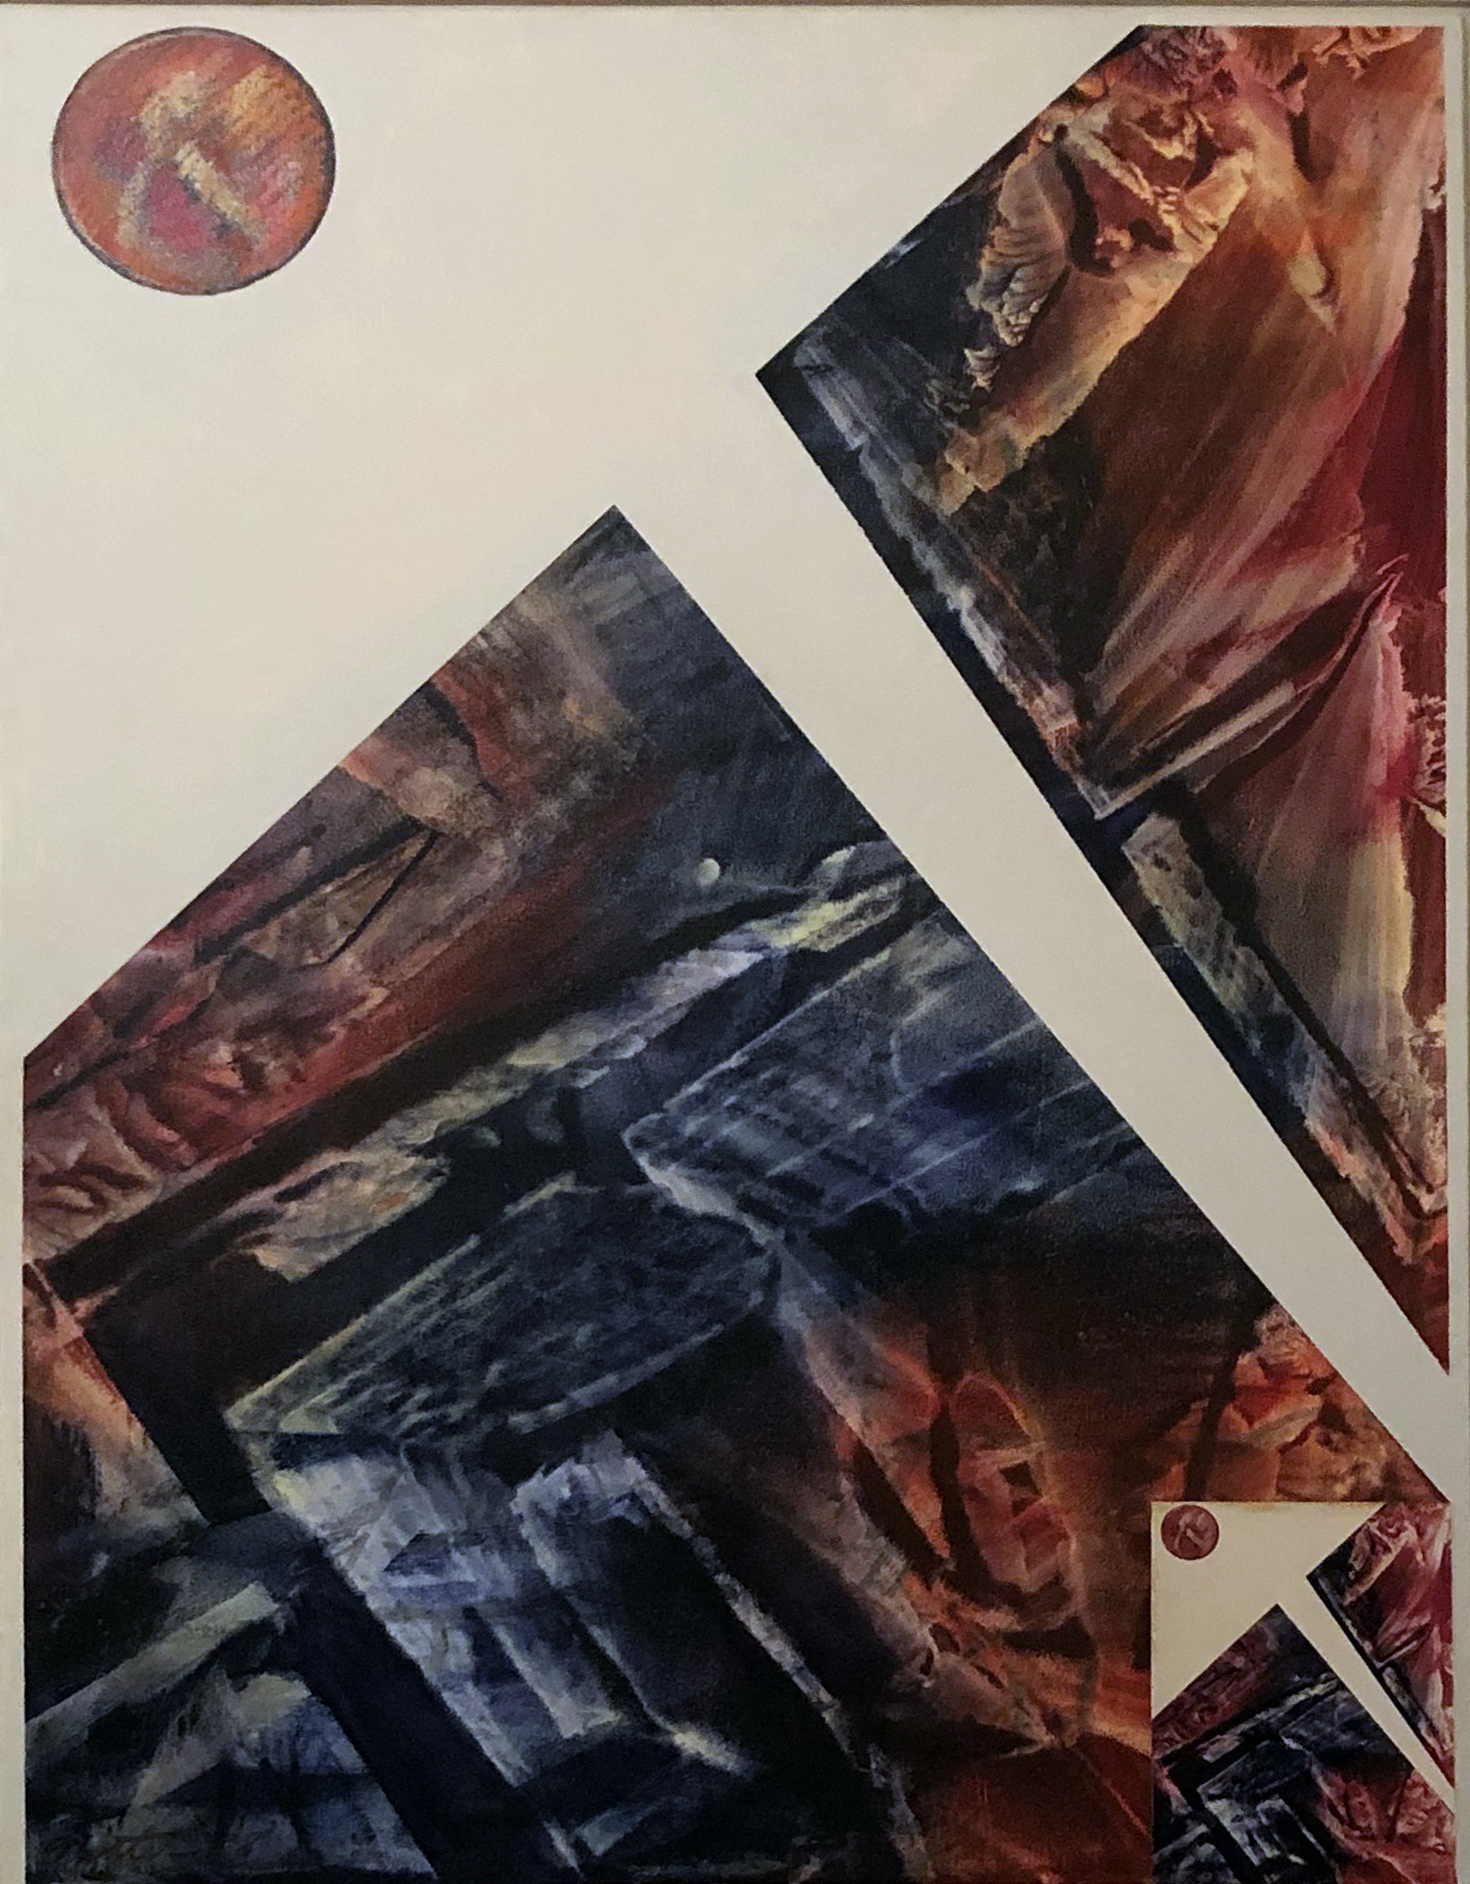 Sunday, 1986 / 1988 / 1990. Oil and collage on canvas, 48 x 36 in. Lent by the artist's estate.